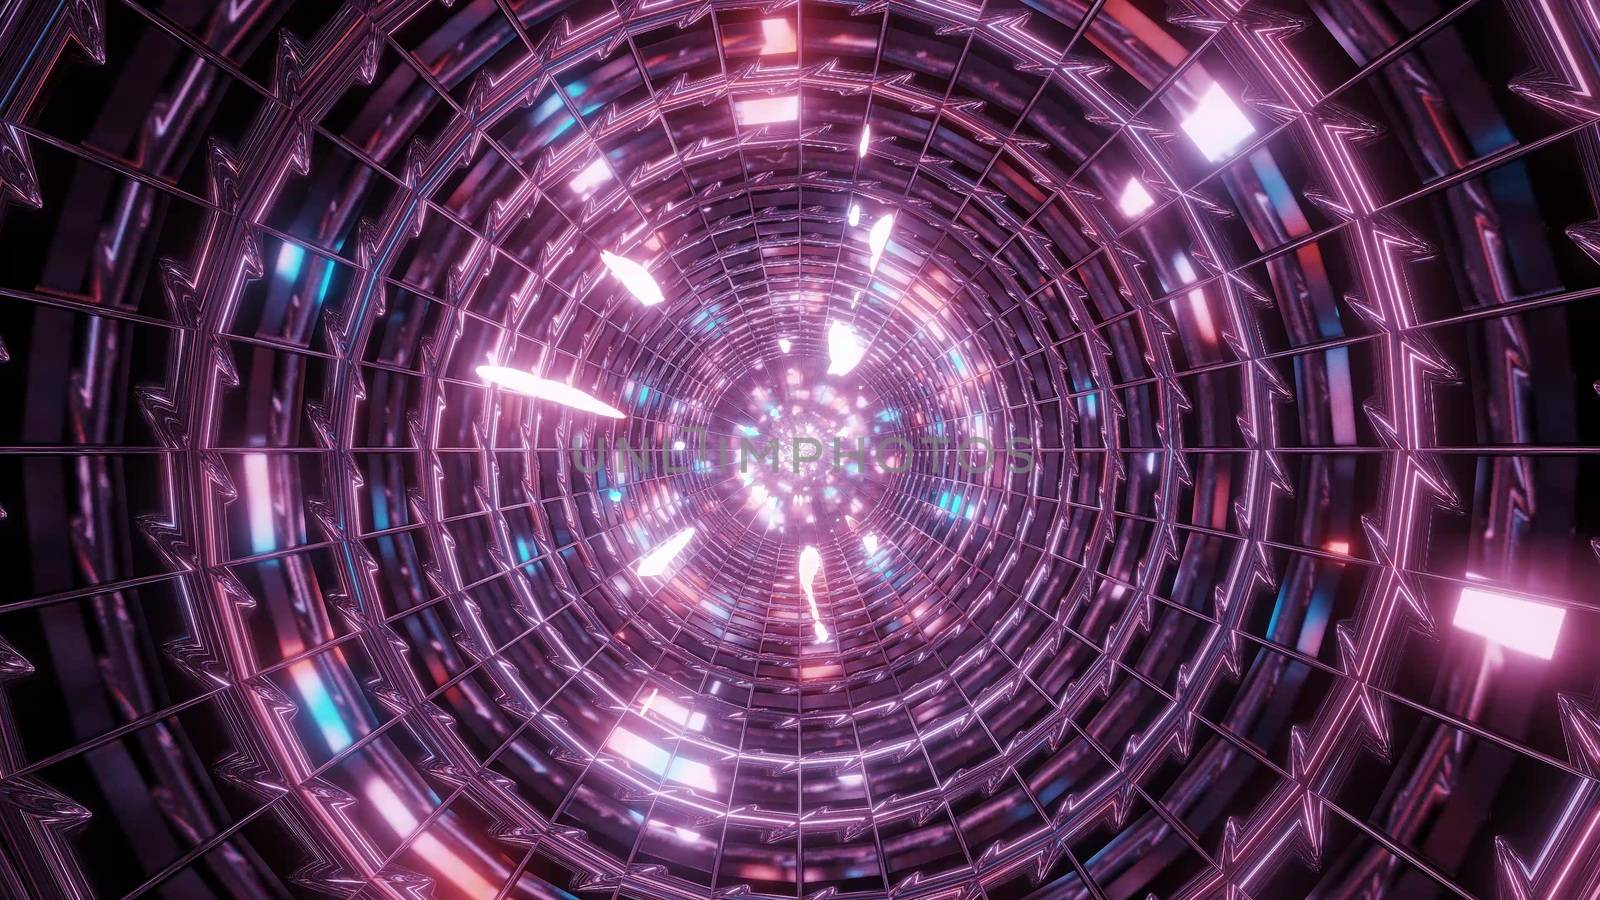 abstract metal tunnel with colorful reflection 3d illustration background wallpaper by tunnelmotions